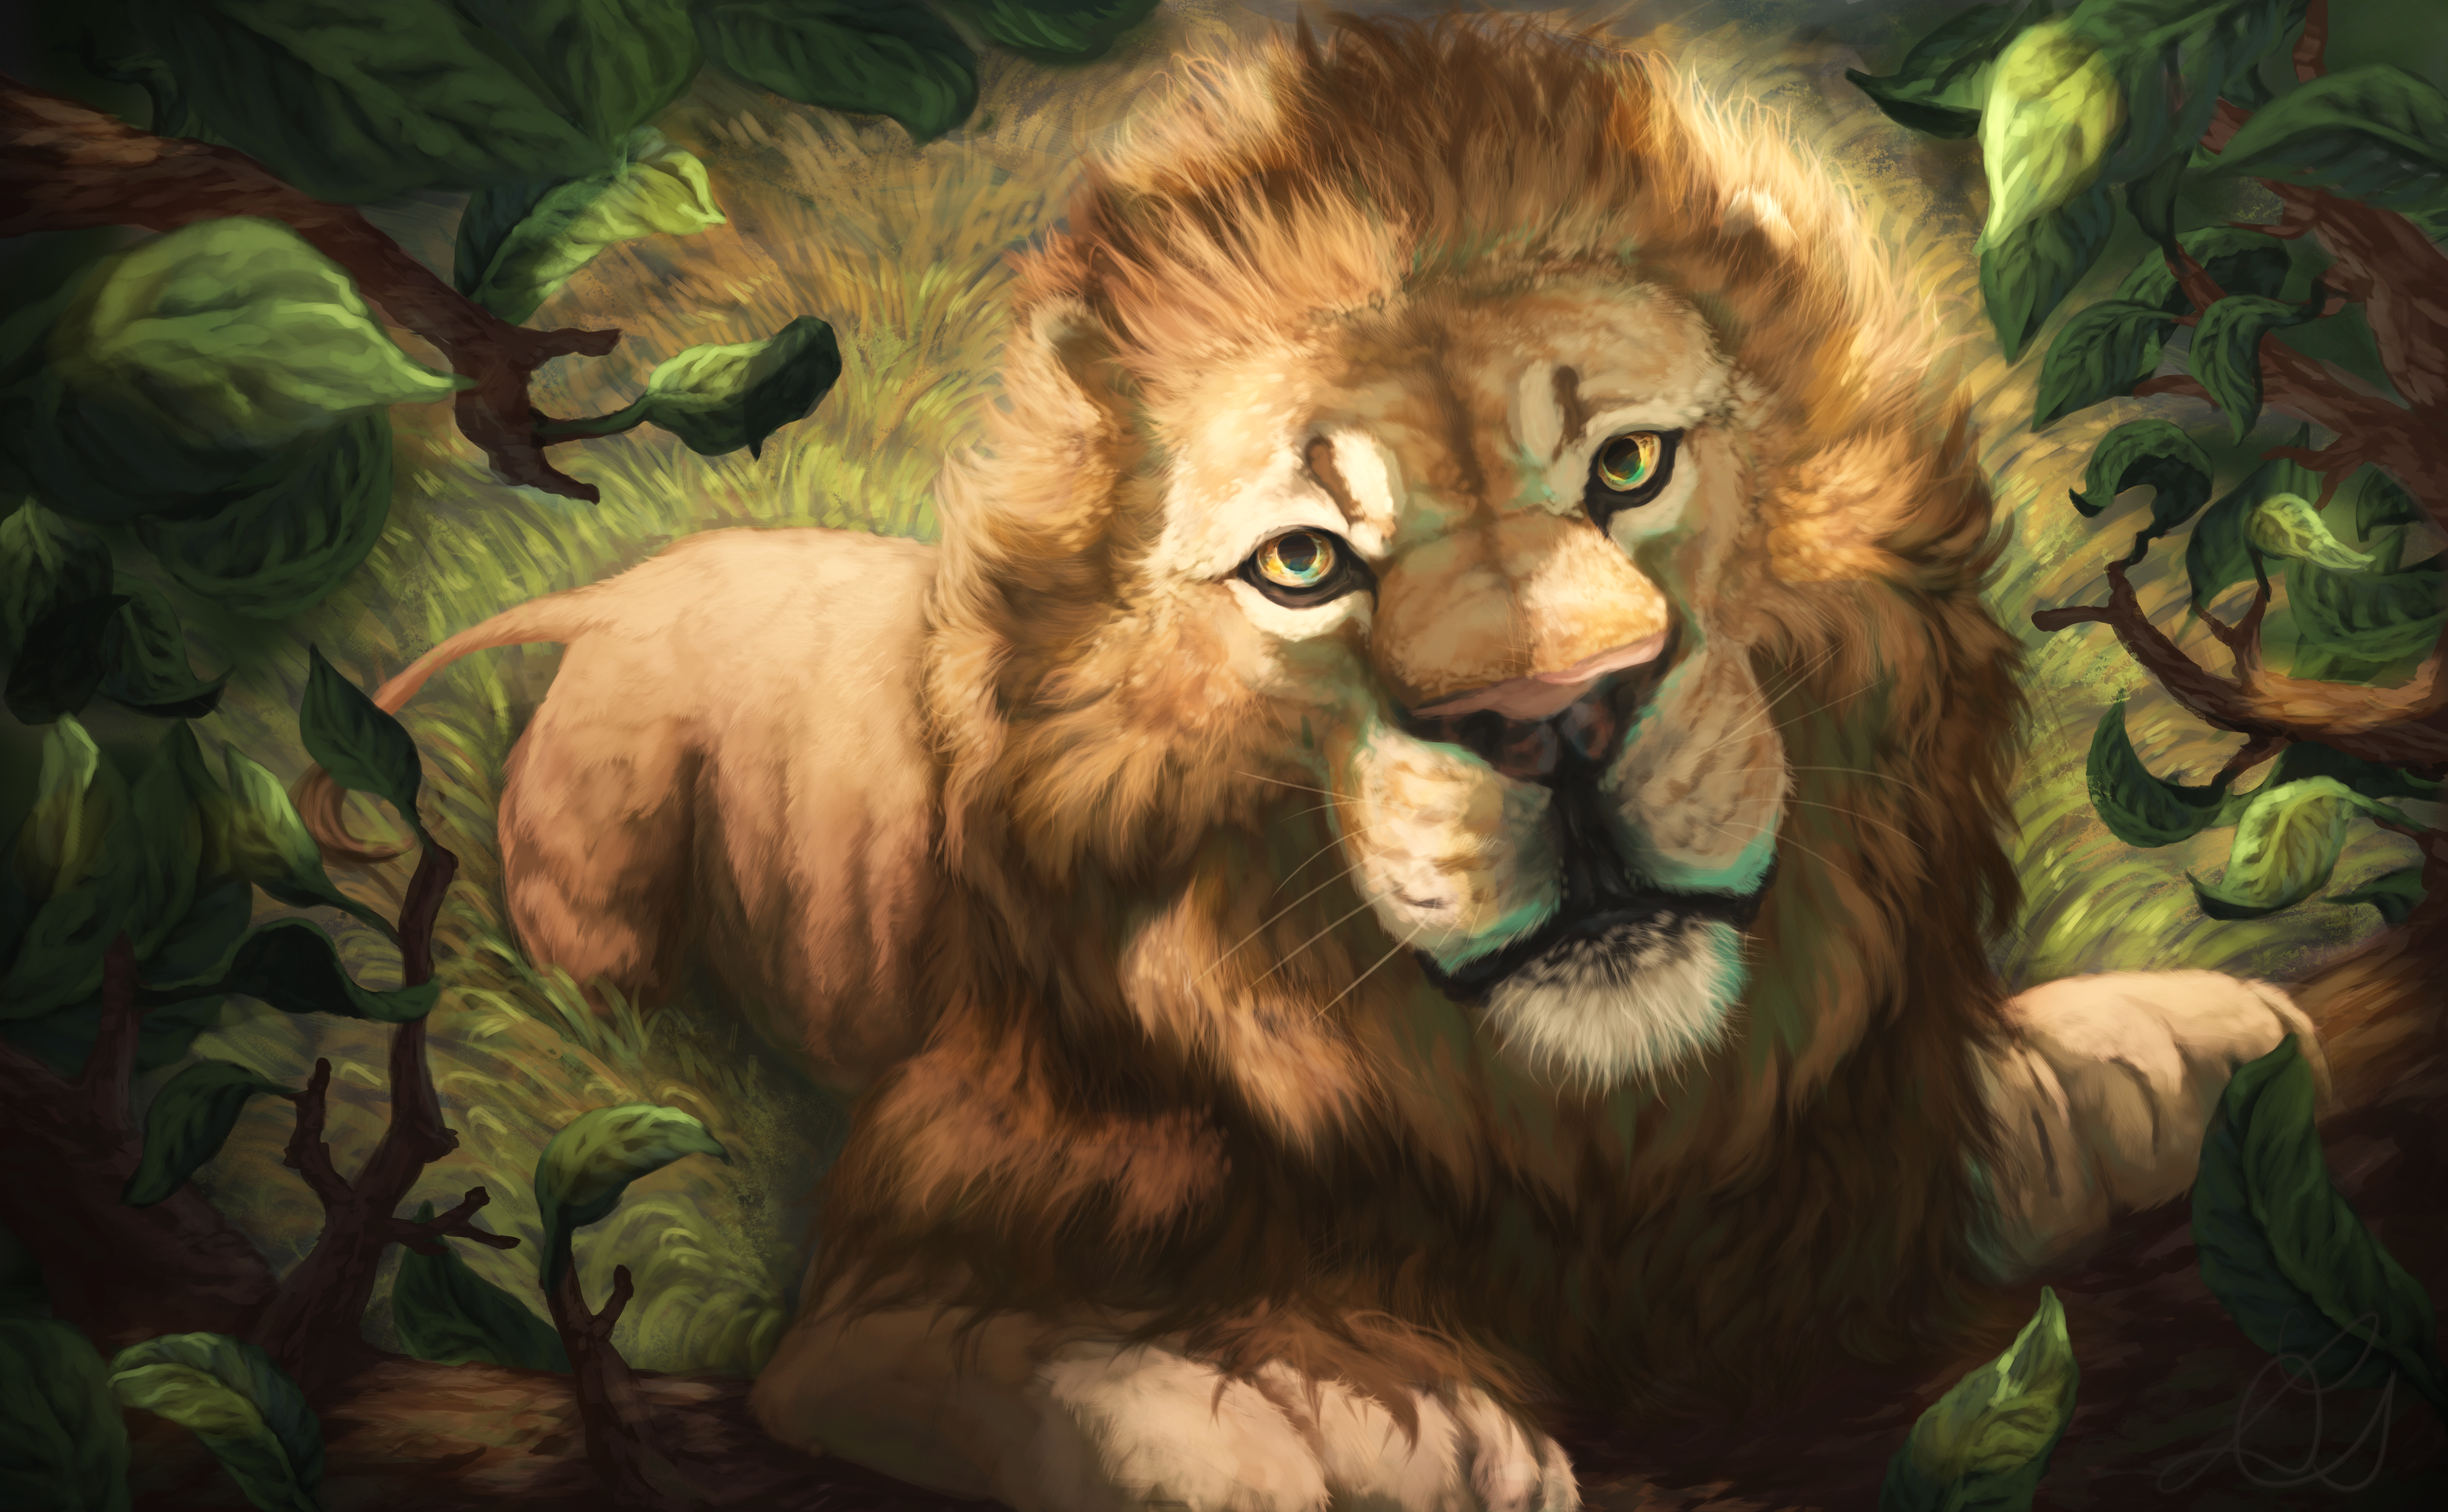 Free HD art, lion, muzzle, picture, drawing, predator, king of beasts, king of the beasts